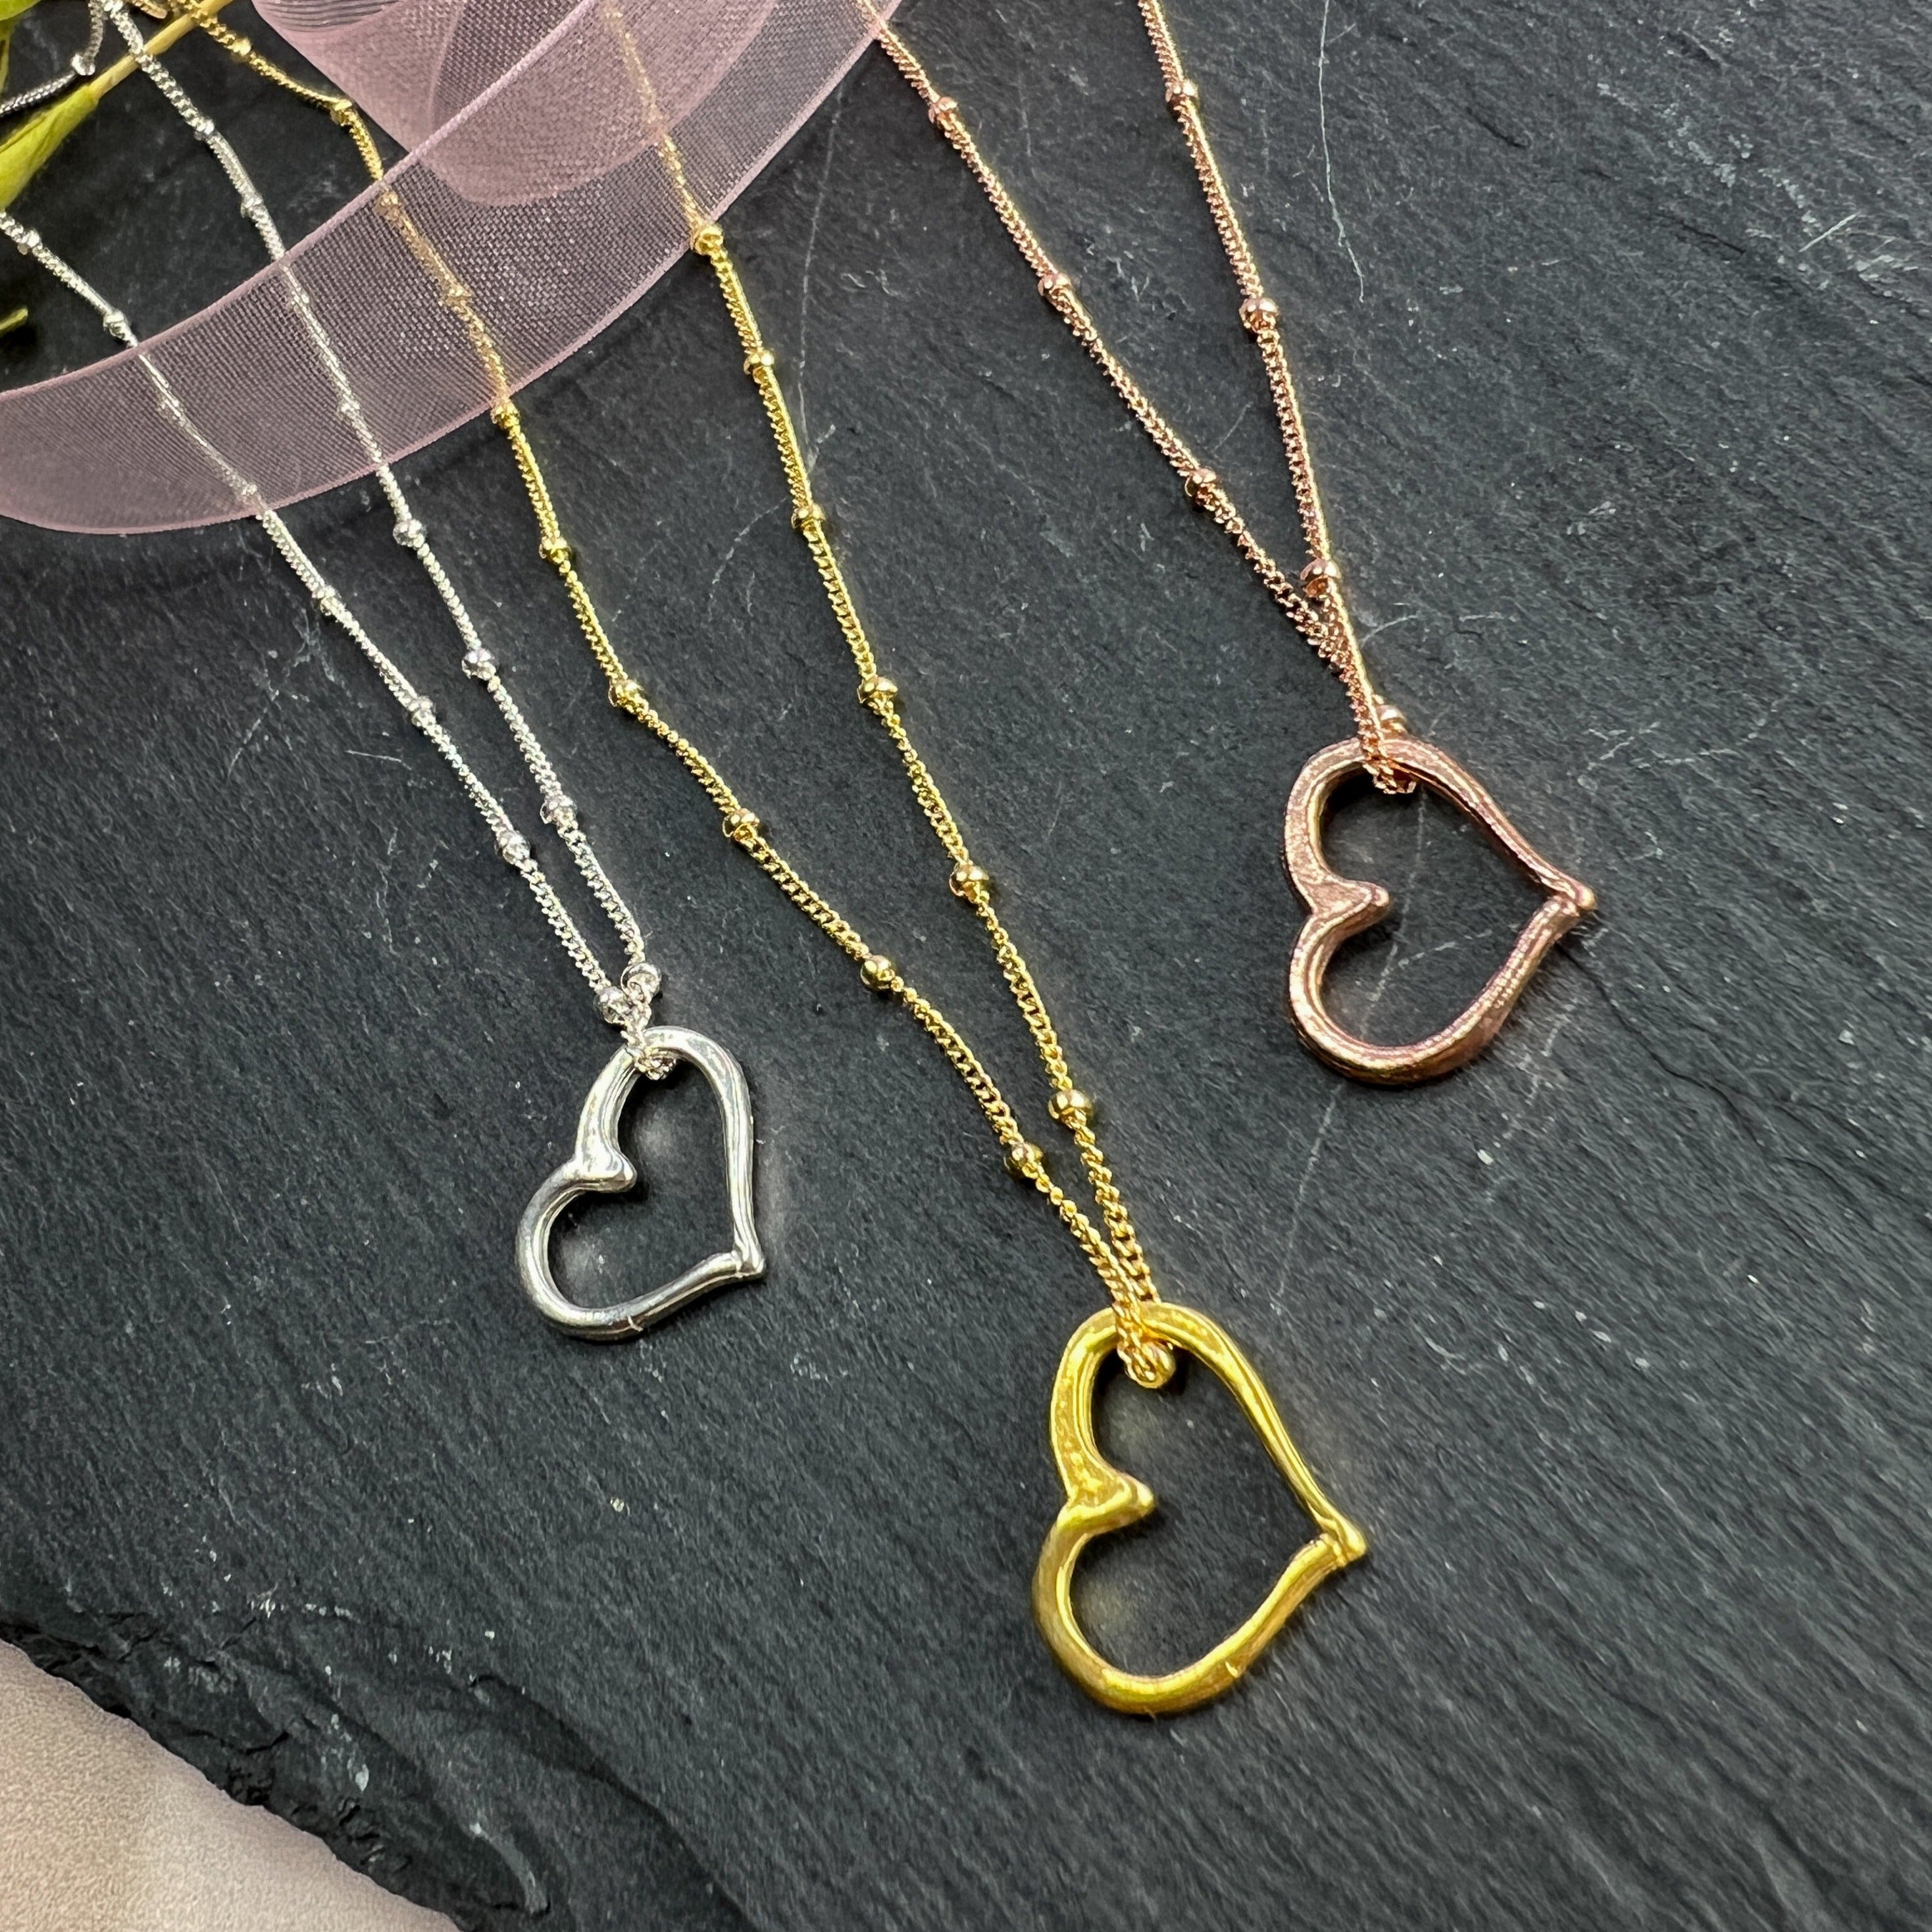 Amazon.com: Finejewelers 14K Yellow Gold Tri-Color 3 Floating Hearts  Pendant Necklace on a 17 Inch Chain : Clothing, Shoes & Jewelry